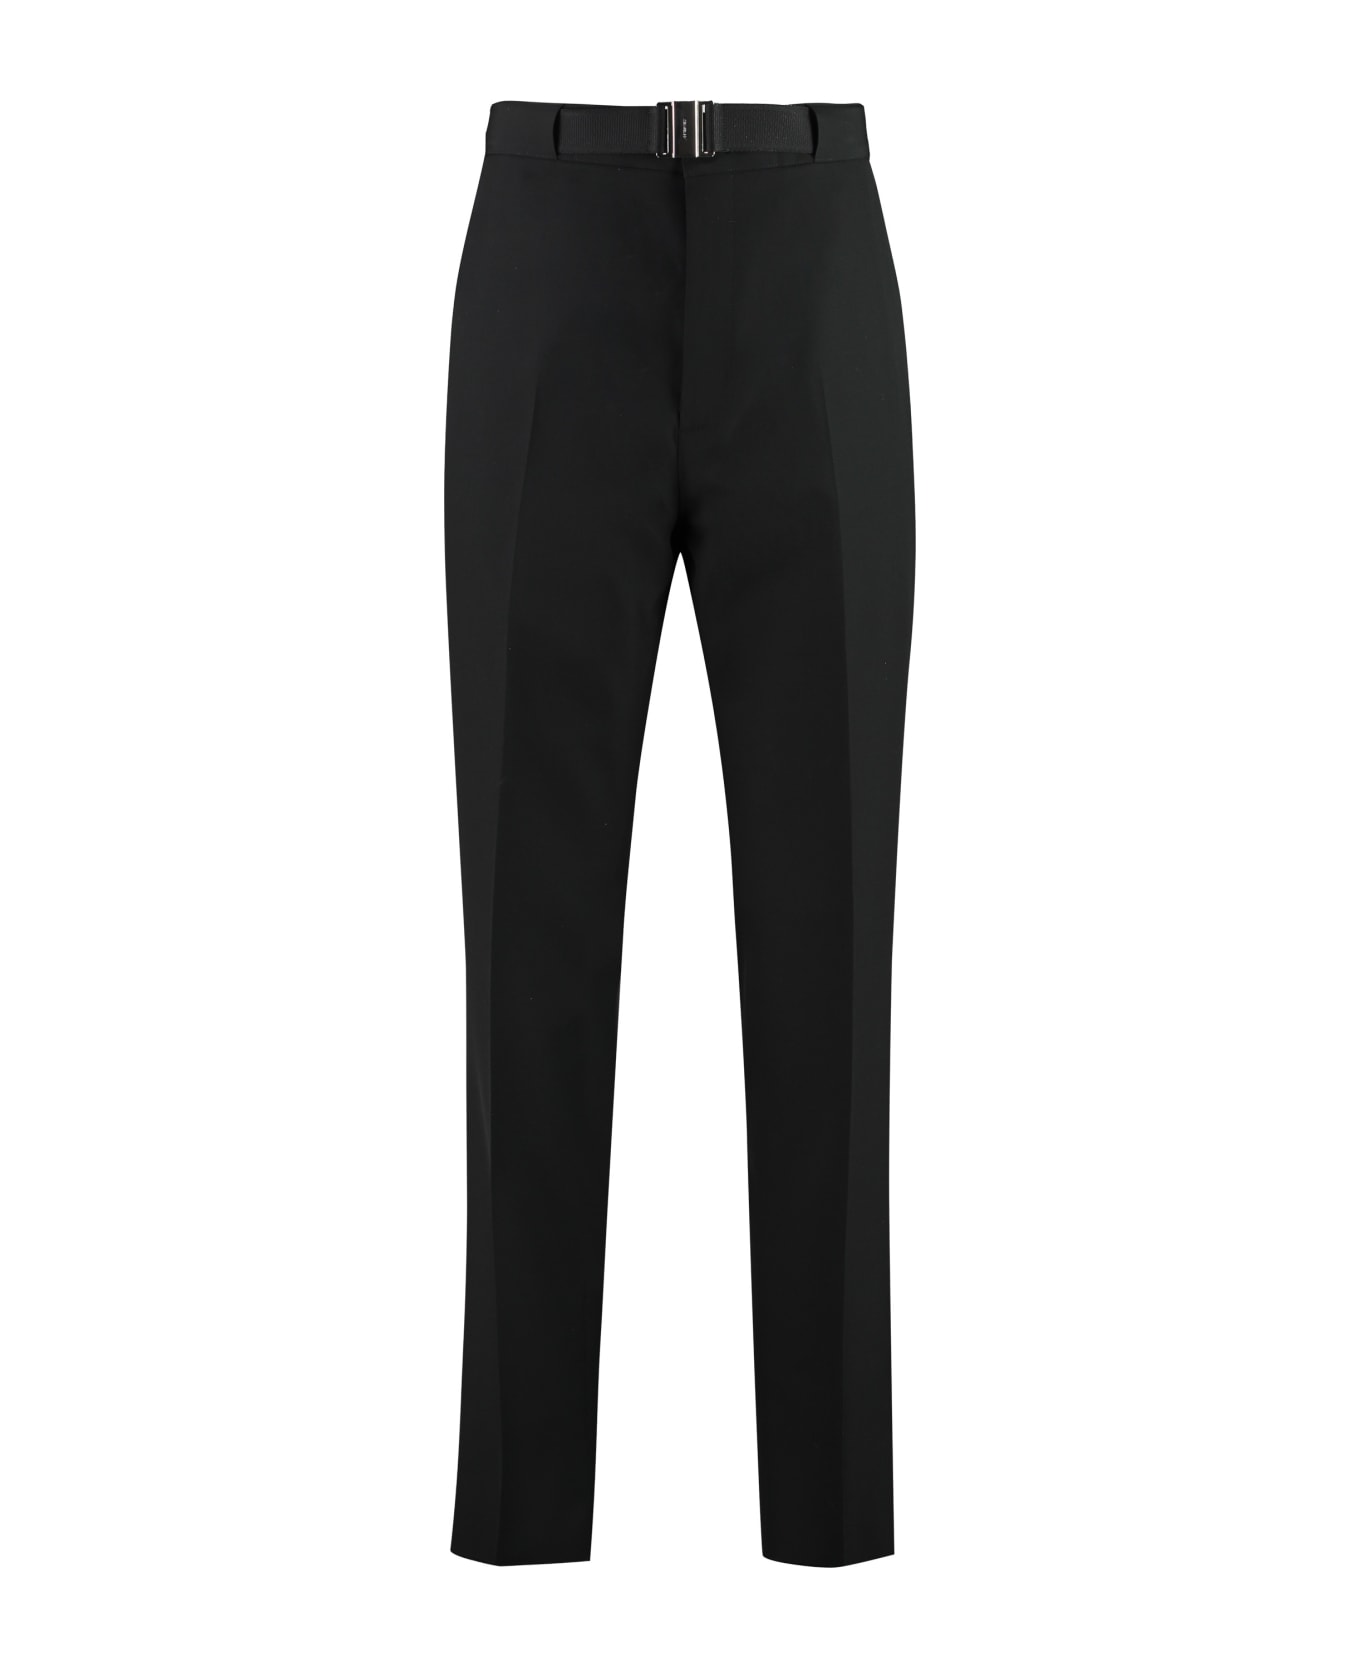 Givenchy Virgin Wool Trousers - BLACK